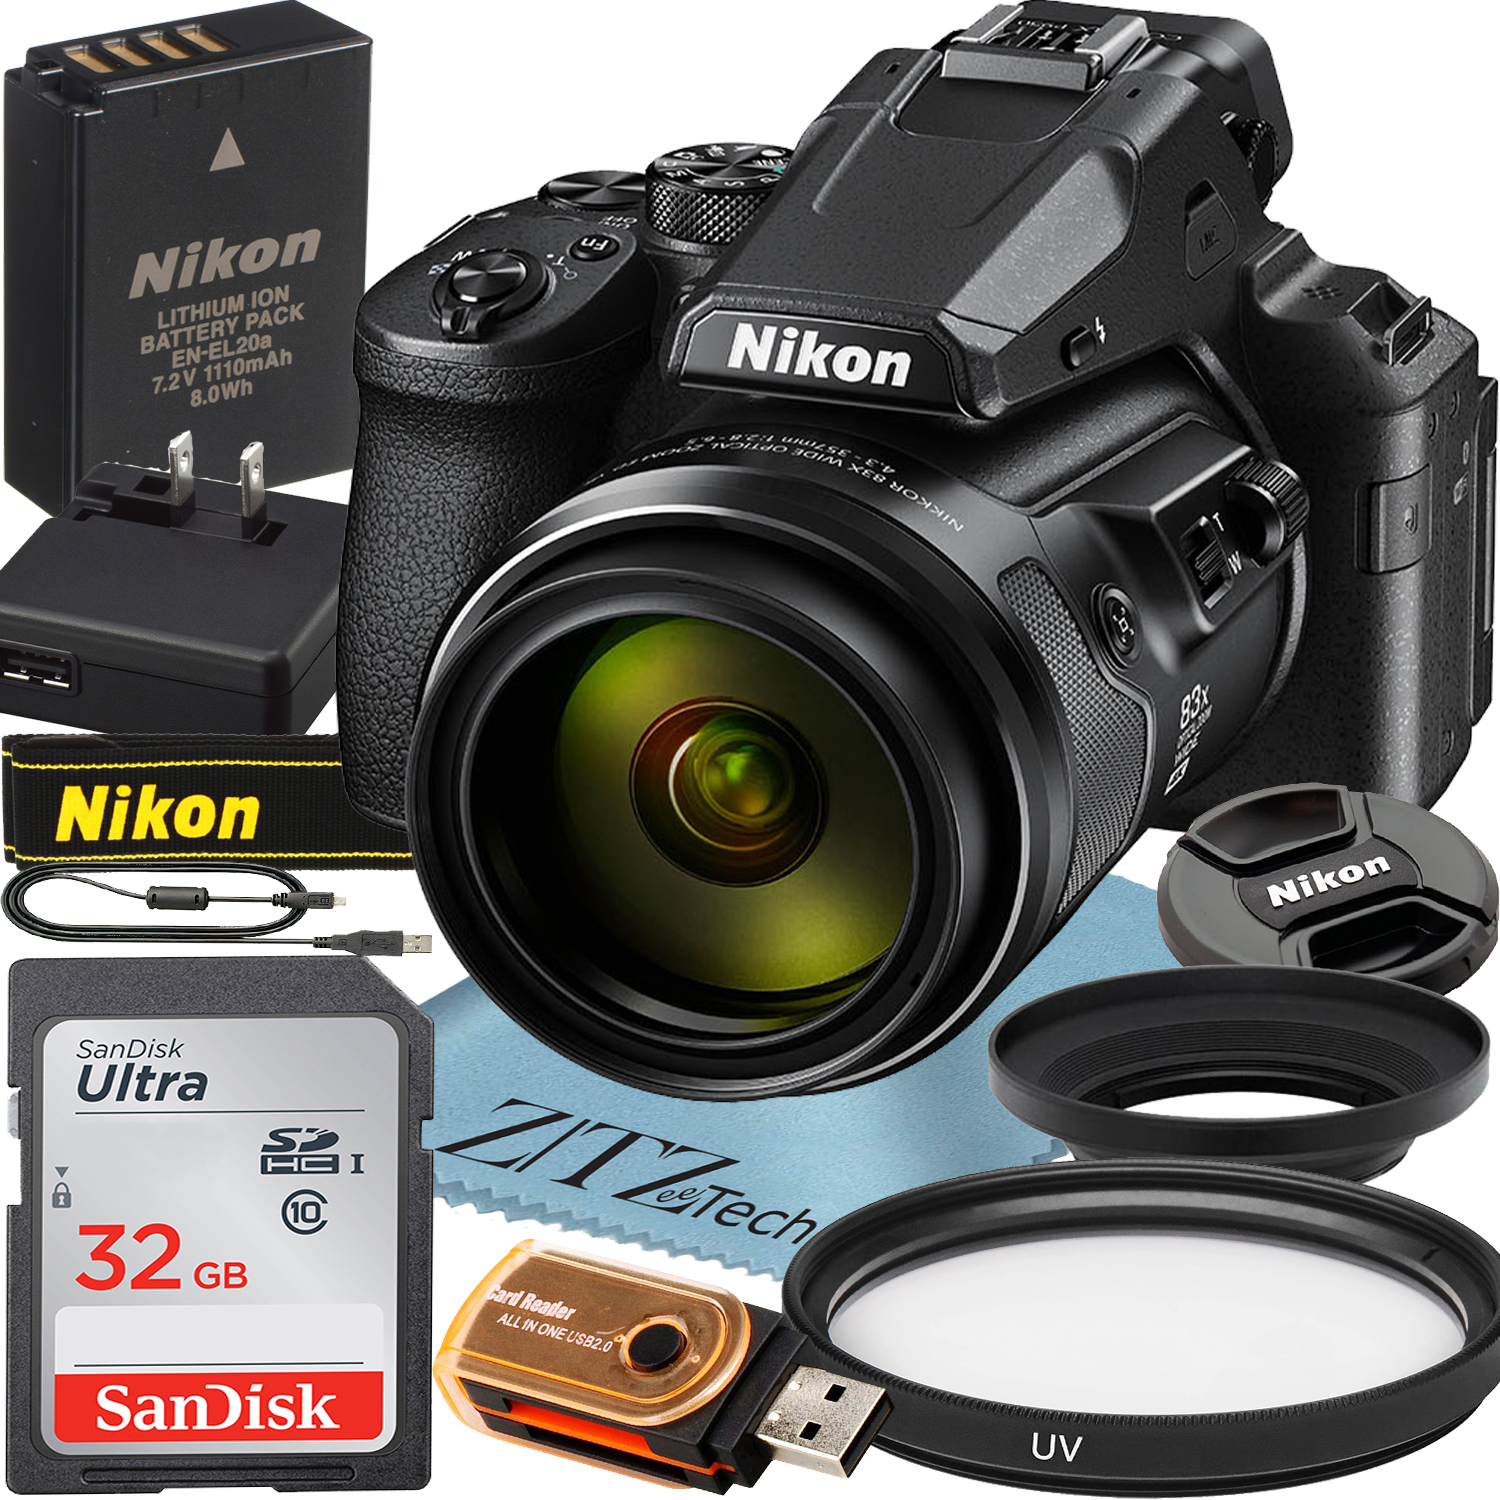 Nikon COOLPIX P950 Digital Camera with SanDisk 32GB Memory Card + UV Filter + ZeeTech Accesory - image 1 of 9